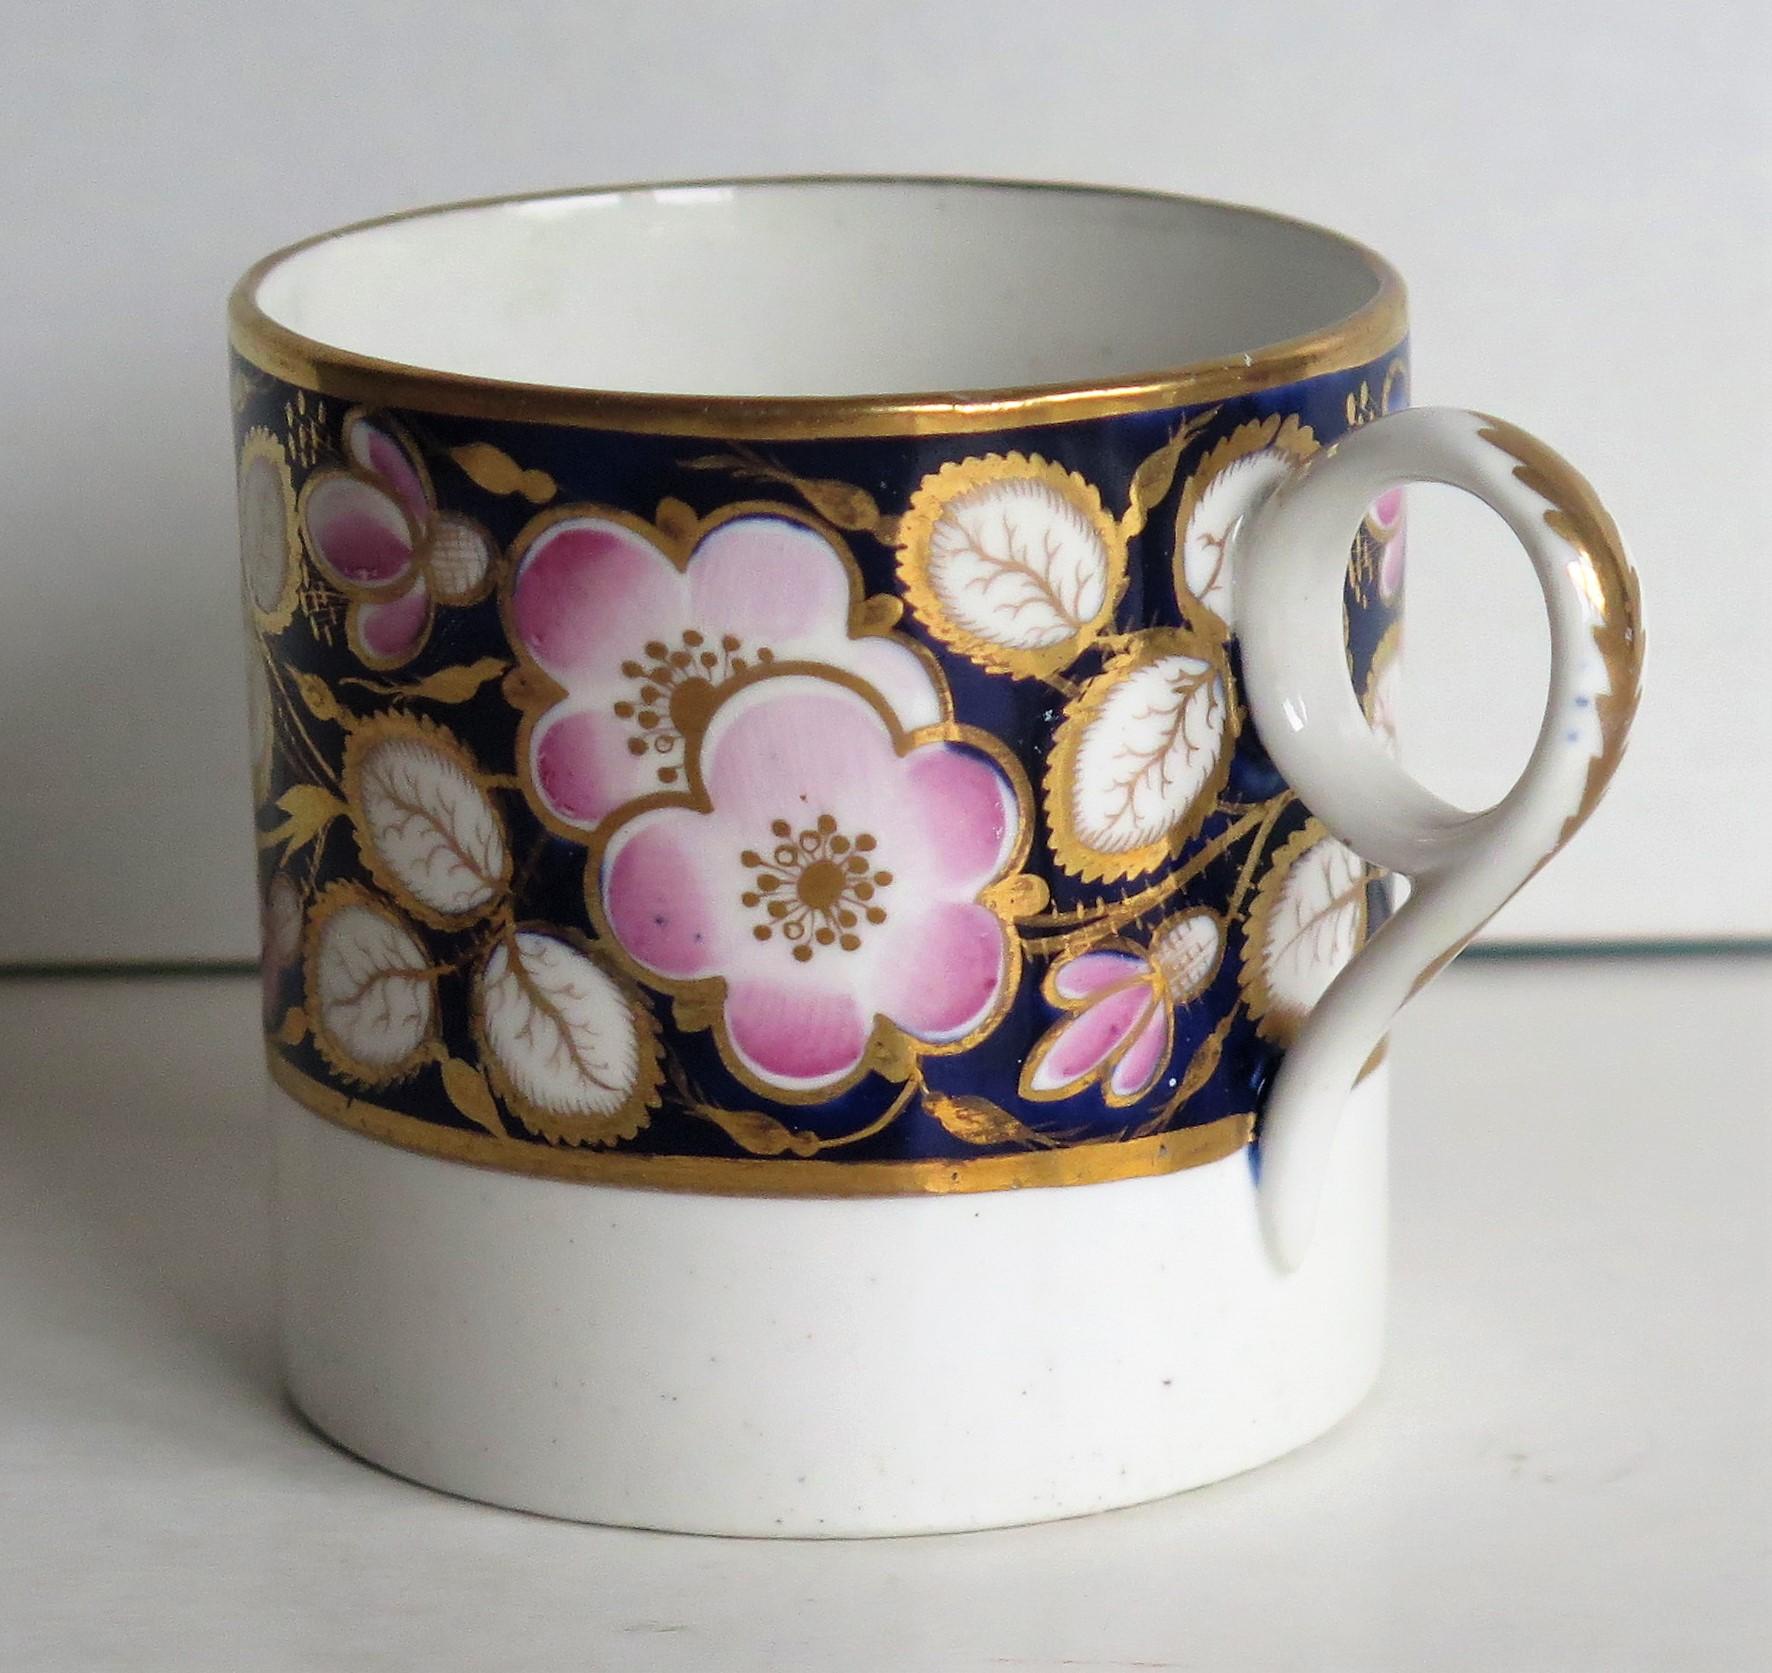 This is an early 19th century porcelain coffee can or cup that we attribute to Machin and Baggaley (or Machin & Co.) of Burslem, Staffordshire, England.

Early Machin porcelain pieces tend to be rare.

This coffee can is nominally straight sided